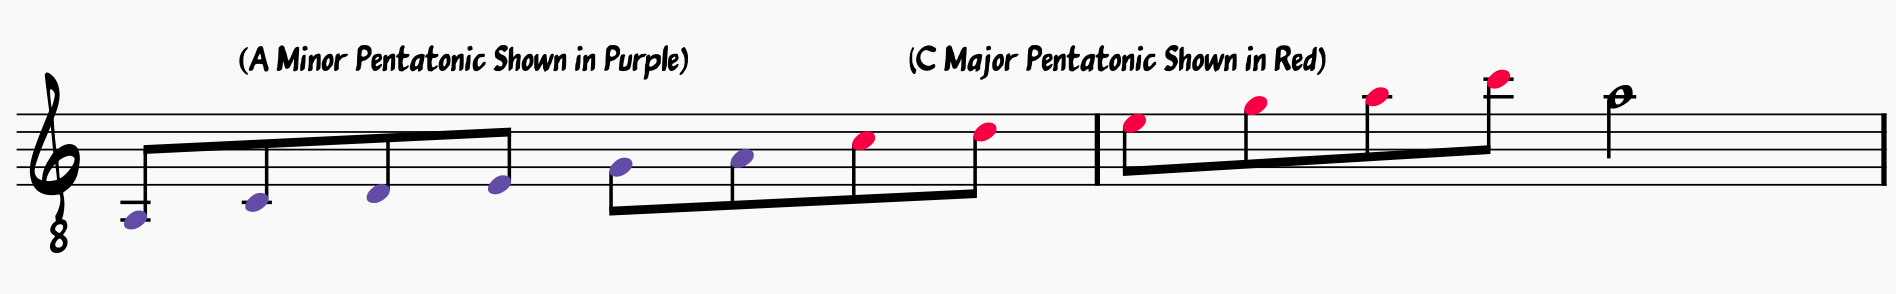 The Major Pentatonic Scale has the same sequence of notes as the minor version. 